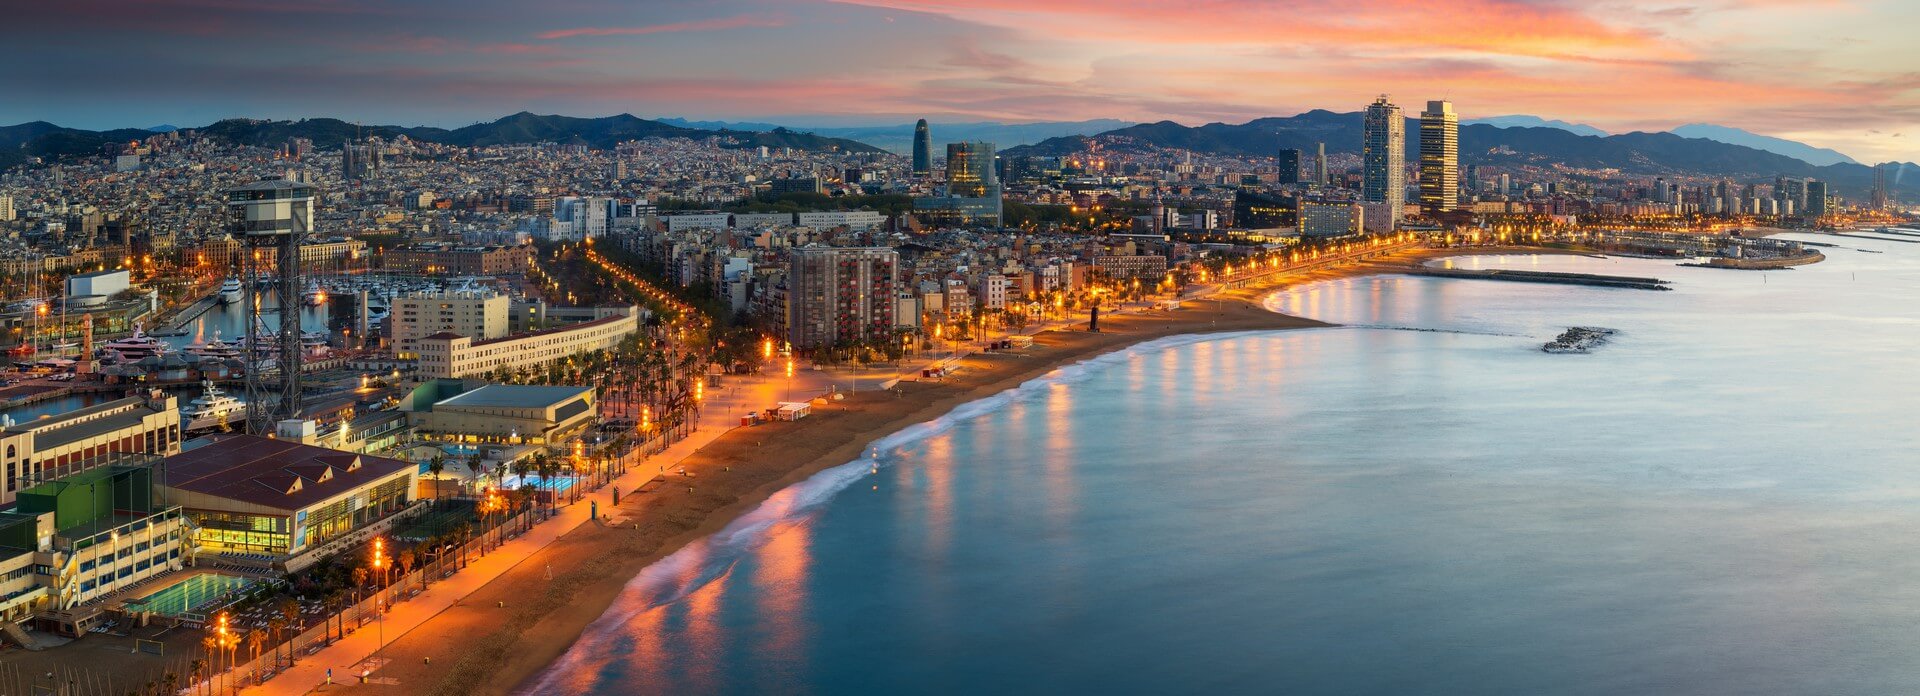 Barcelona beach on morning sunrise with Barcelobna city and sea from the roof top of Hotel, Spain
